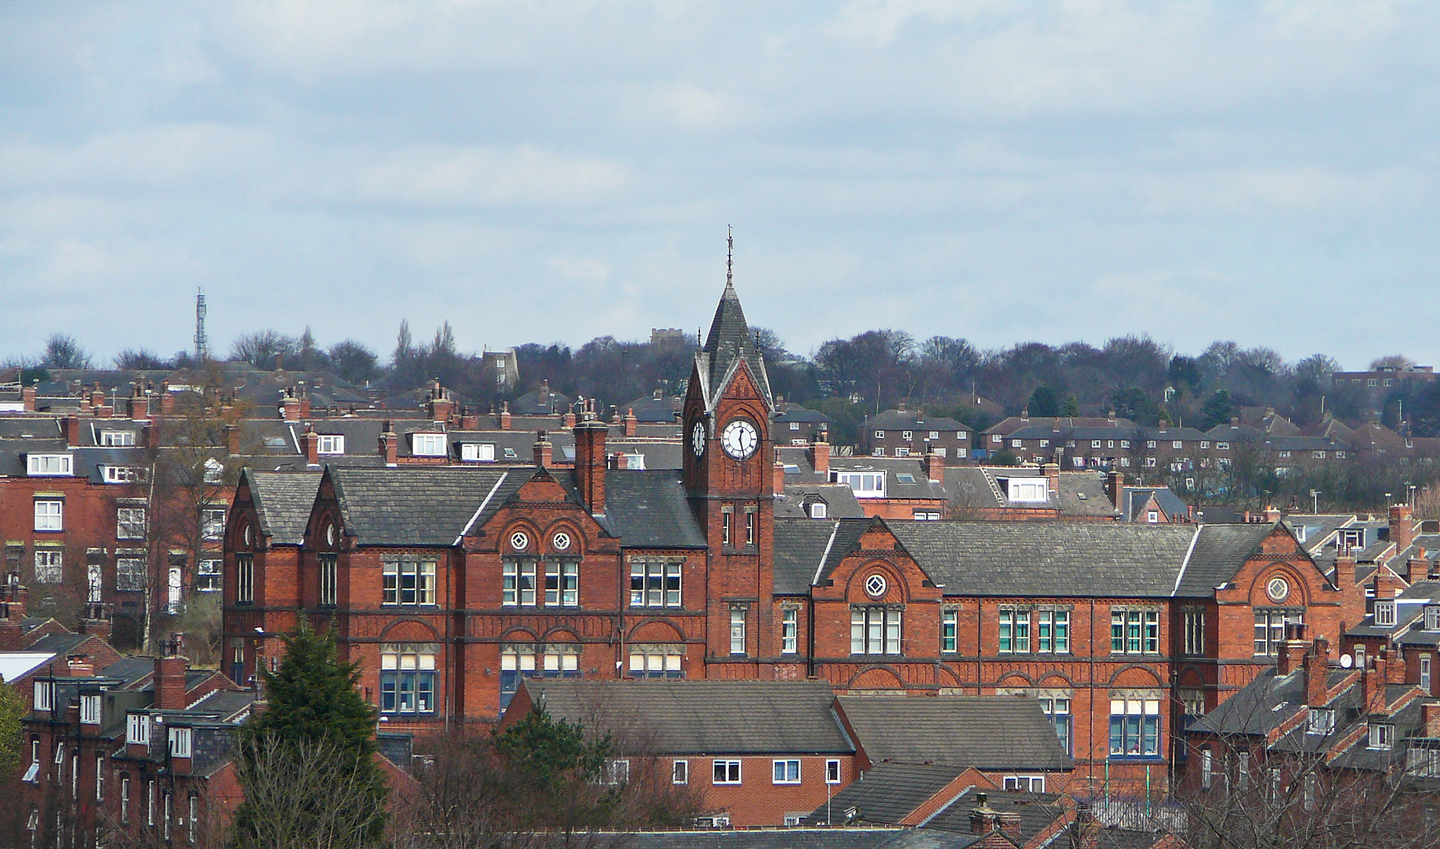 Student Accommodation in Woodhouse, Leeds - Rooftops of Woodhouse, Leeds with Quarry Mount Primary School in view